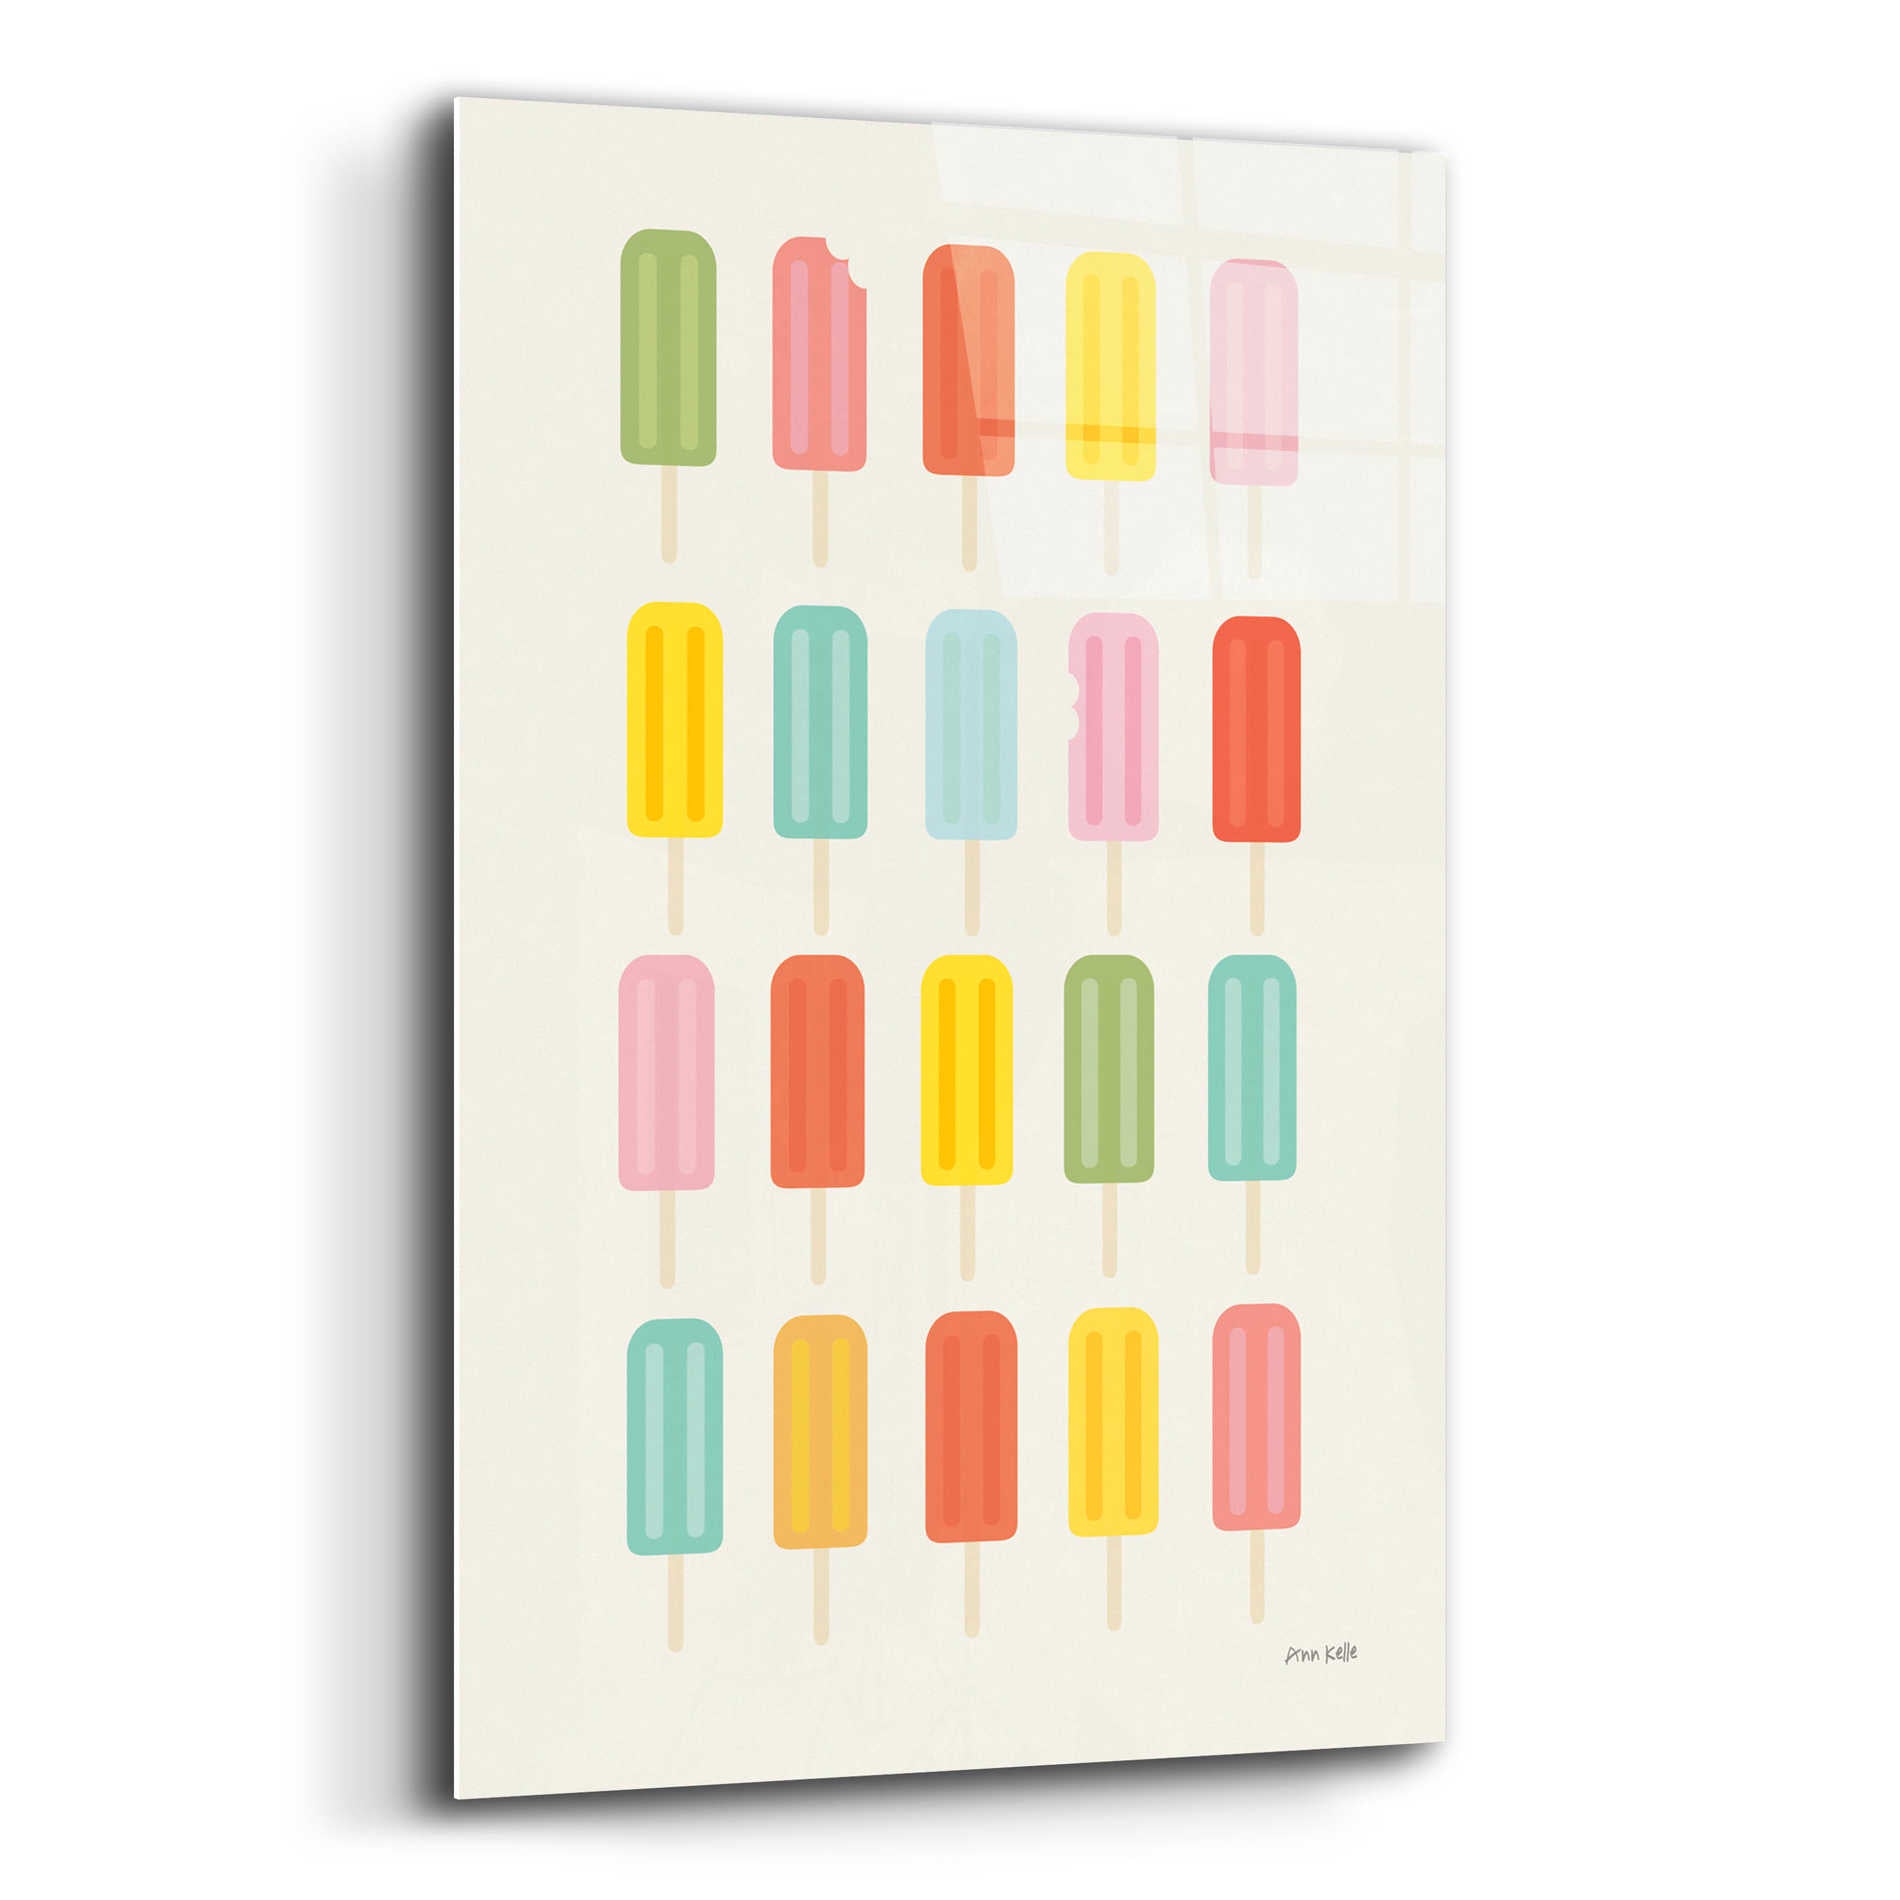 Epic Art 'Colorful Popsicles' by Ann Kelle Designs, Acrylic Glass Wall Art,16x24